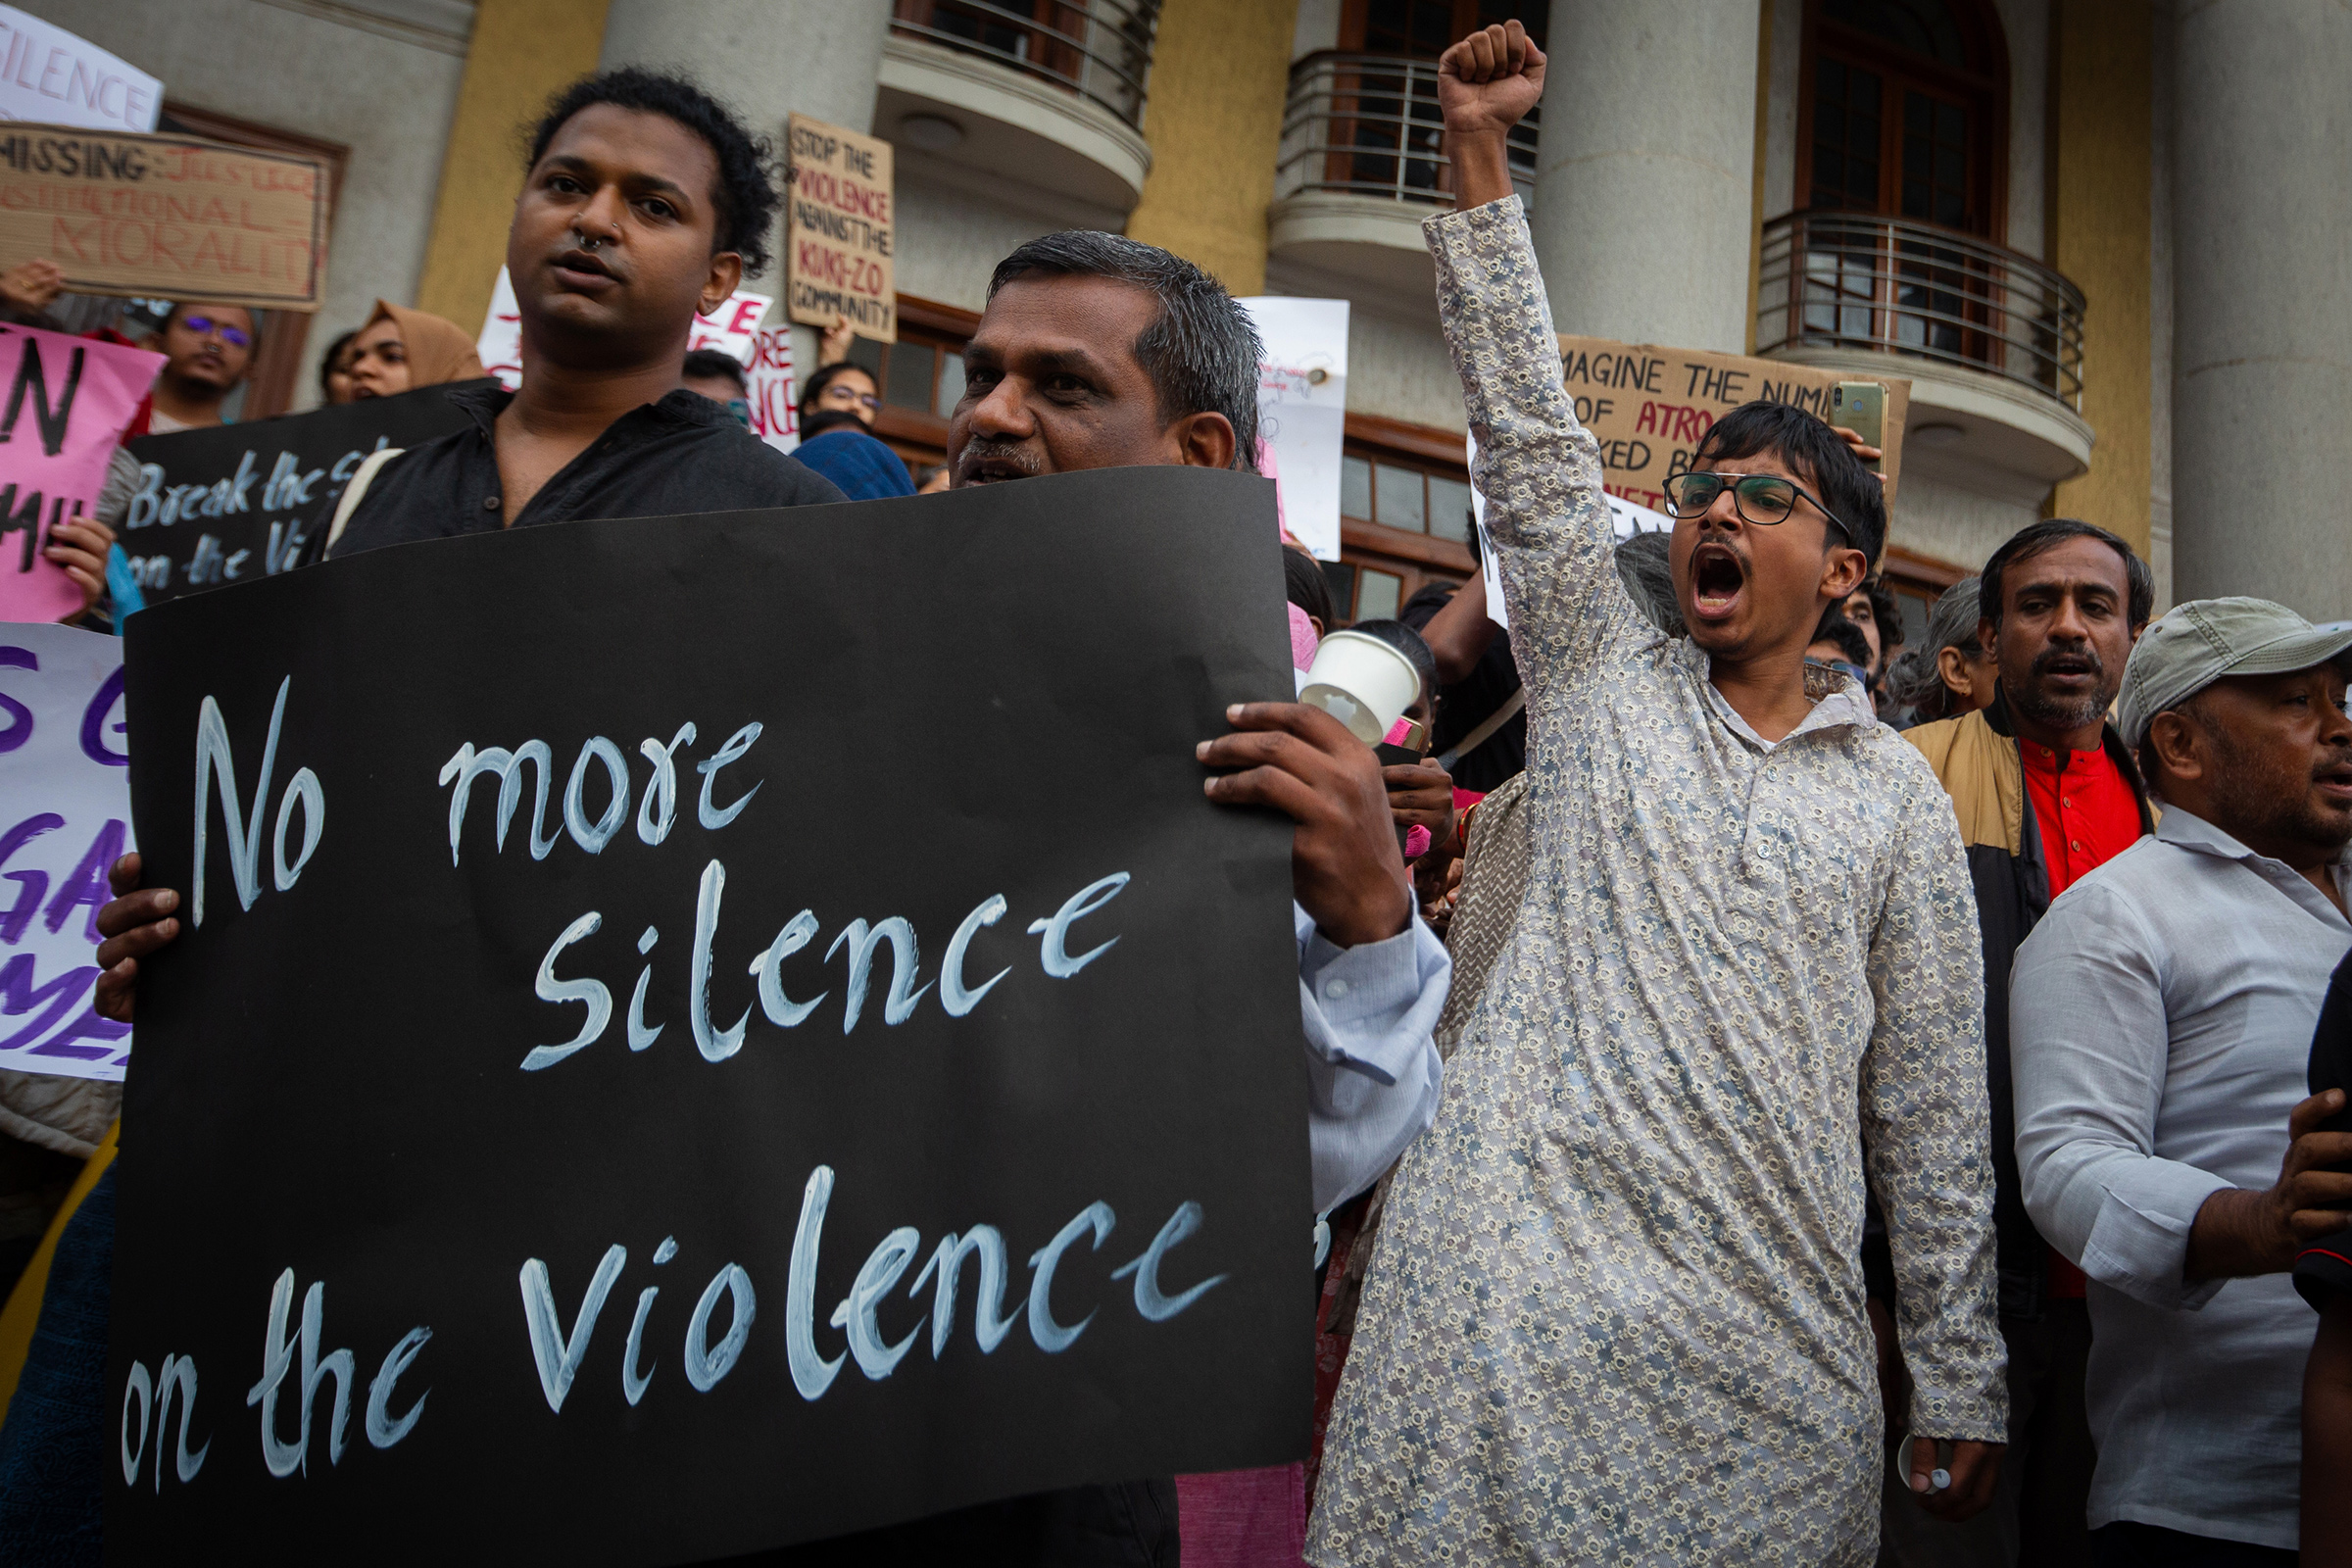 People shout slogans and hold up placards during a protest against violence in the northeastern Indian state of Manipur on July 21 in Bengaluru, India.